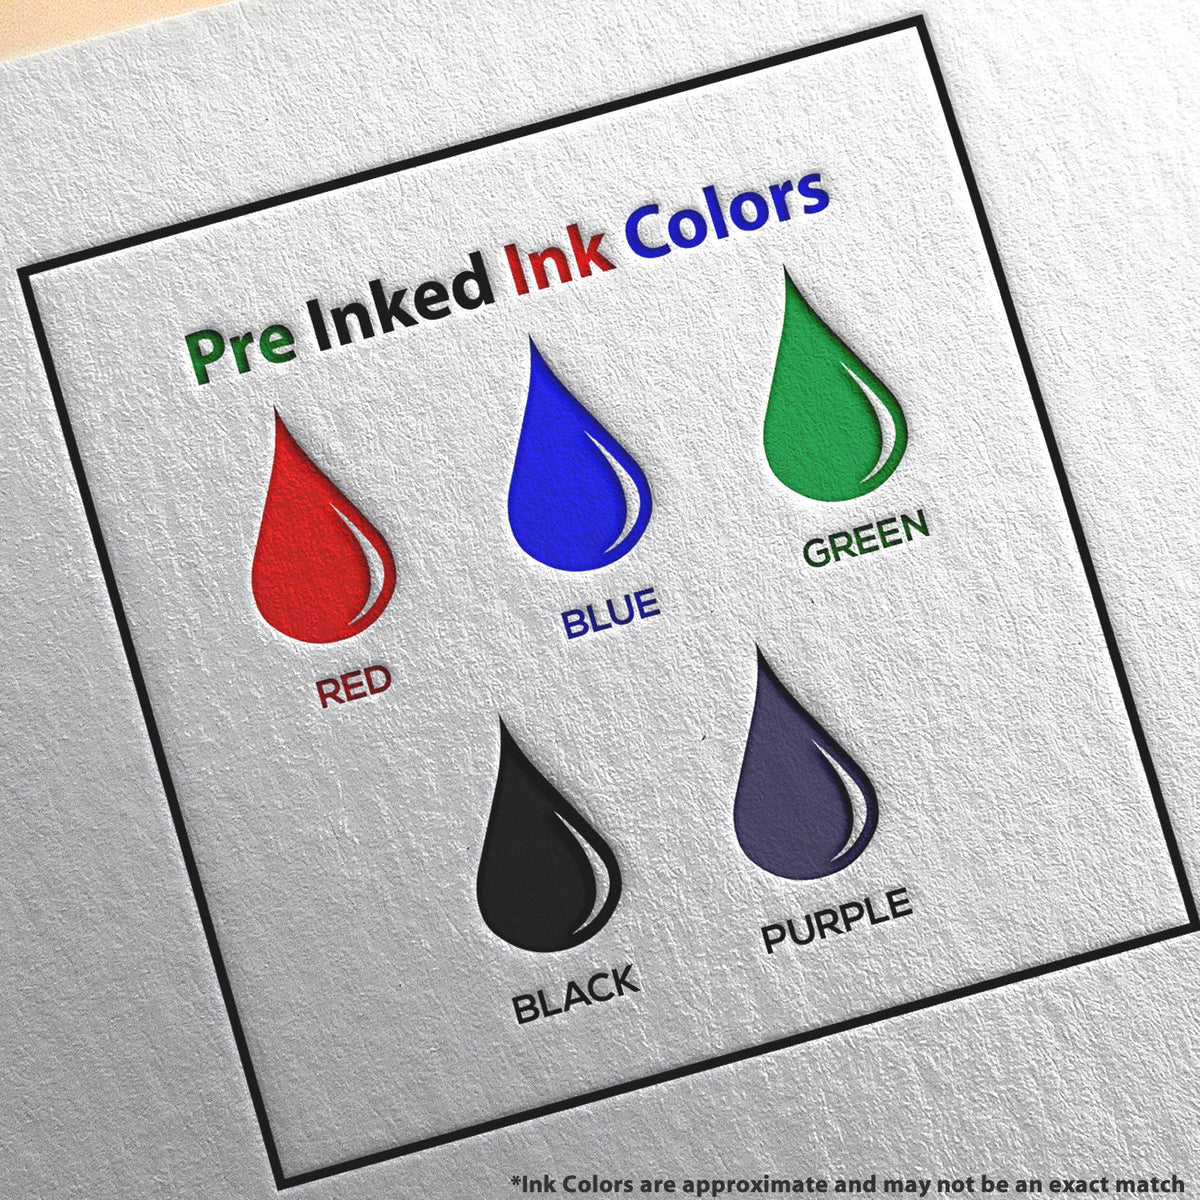 A picture showing the different ink colors or hues available for the PSI Illinois Notary Stamp product.